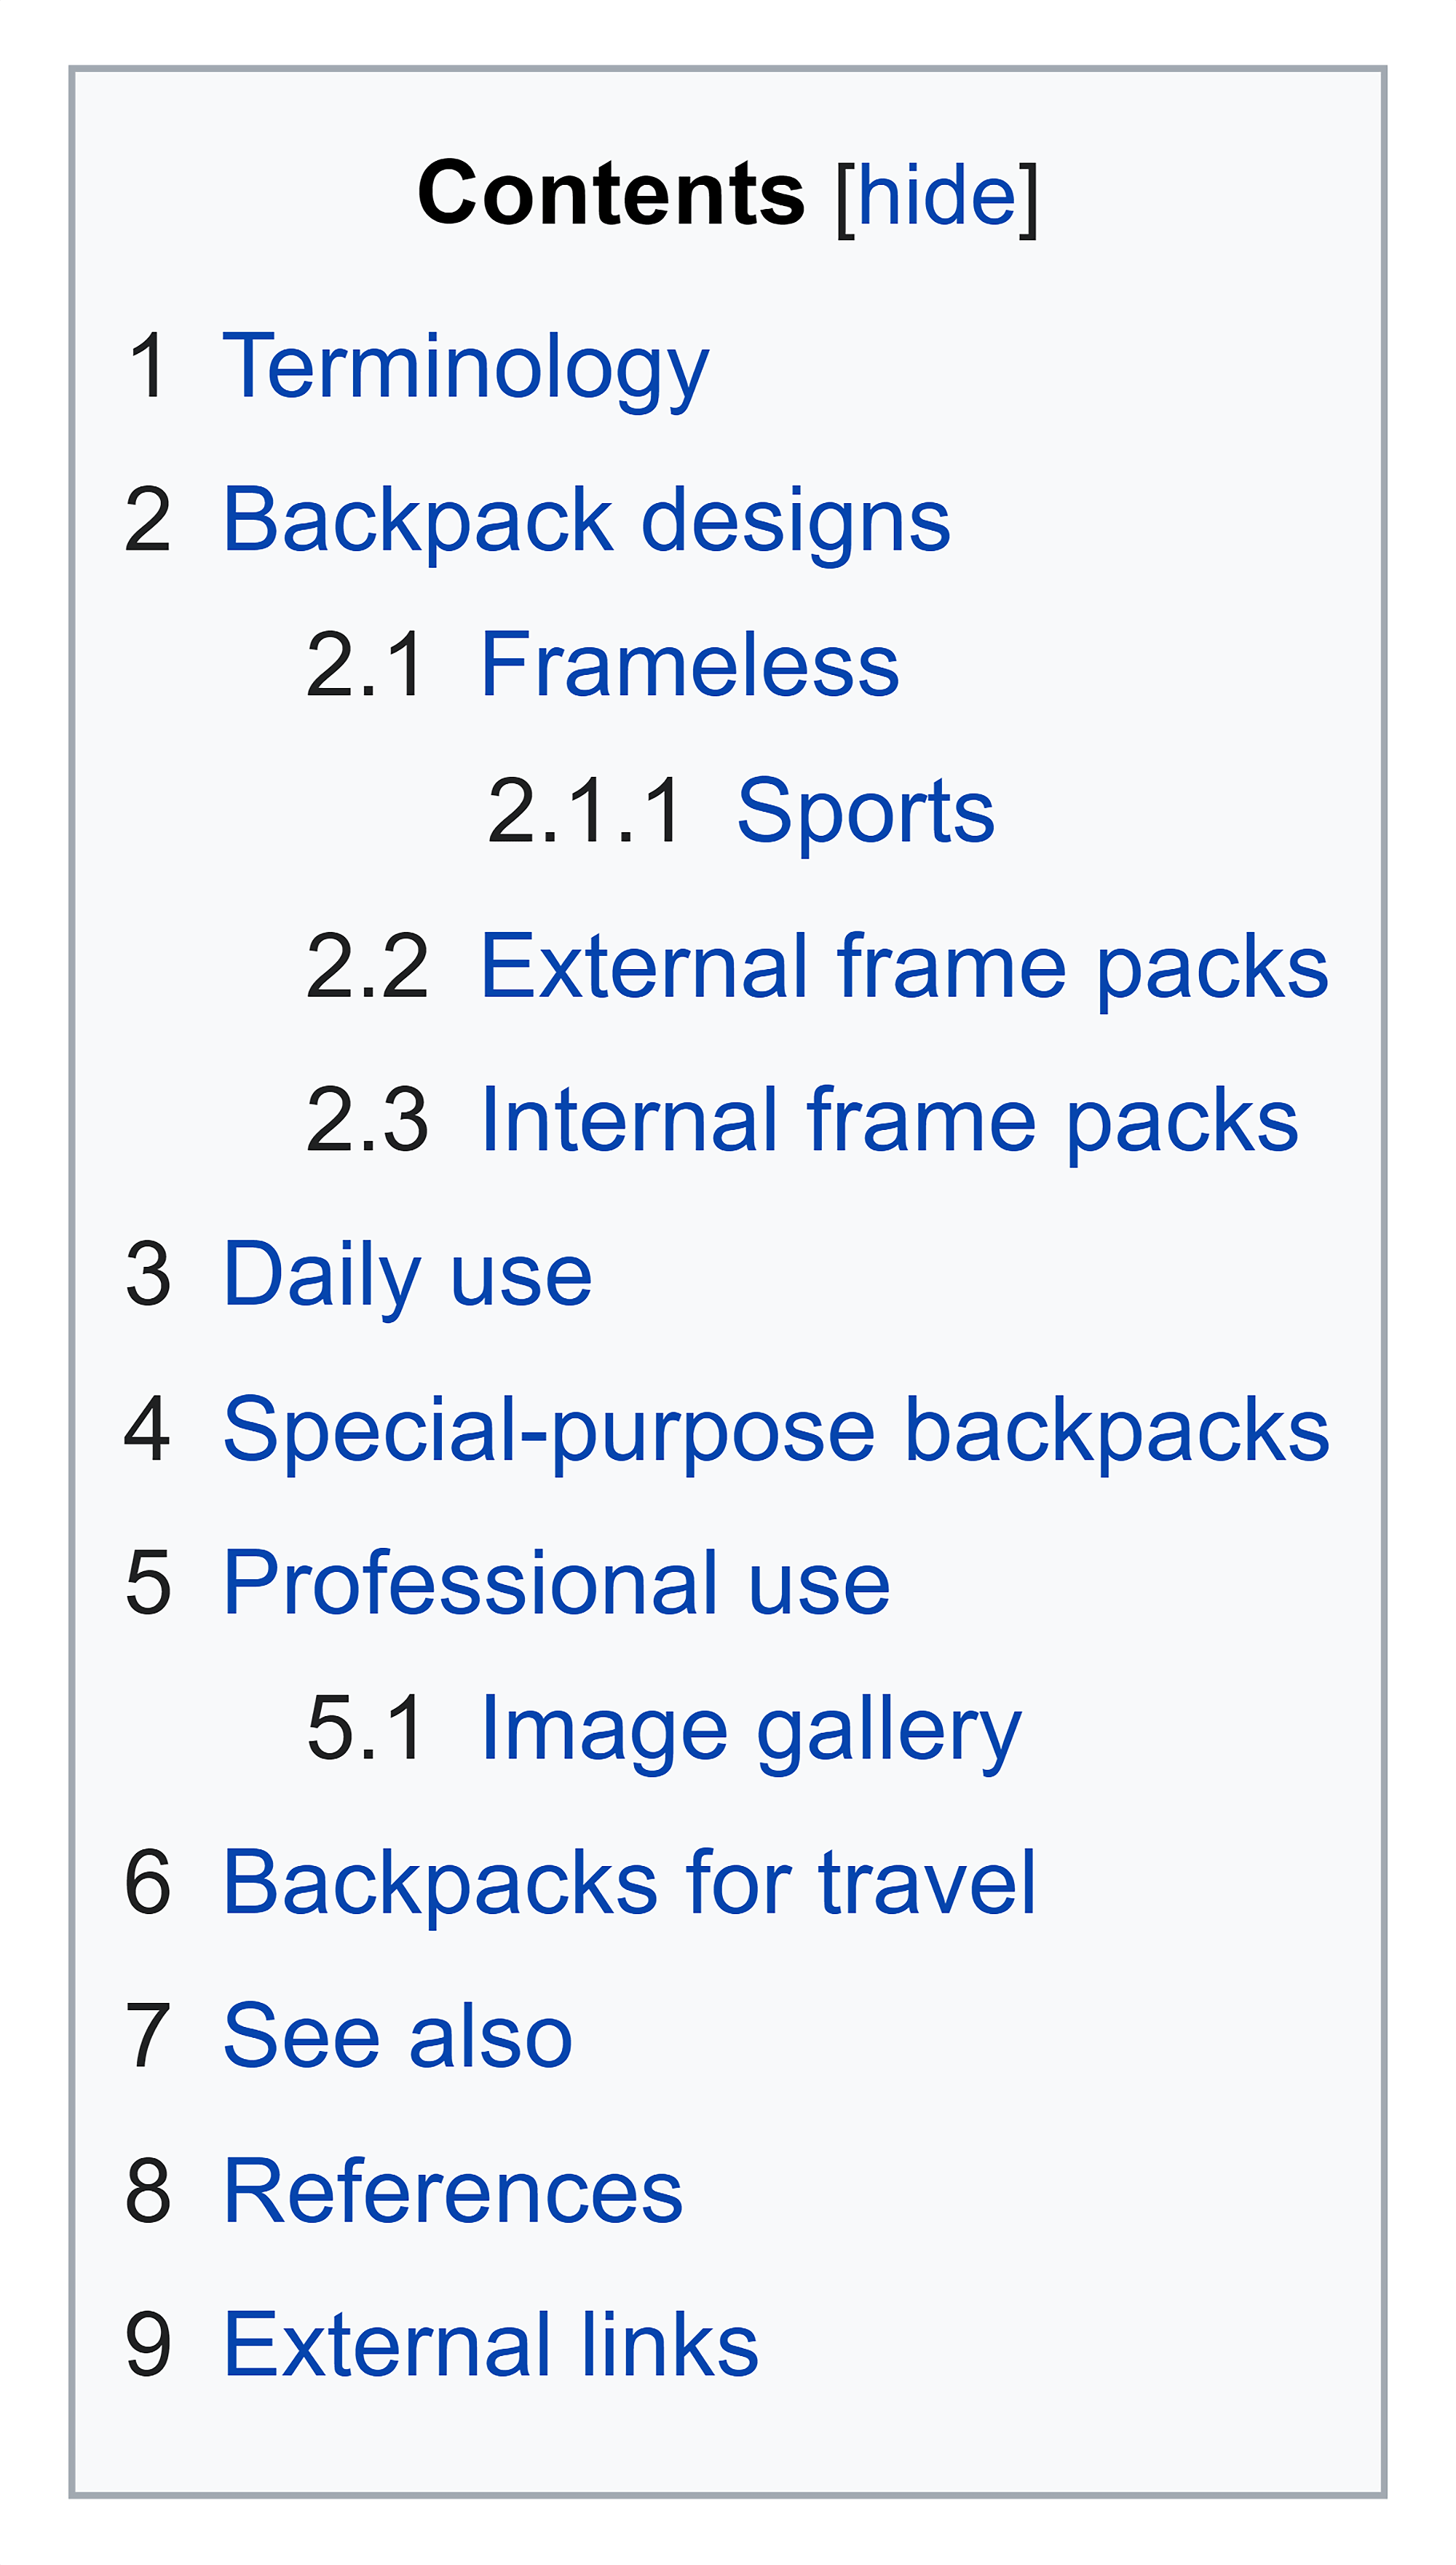 Wikipedia – Backpack – Contents